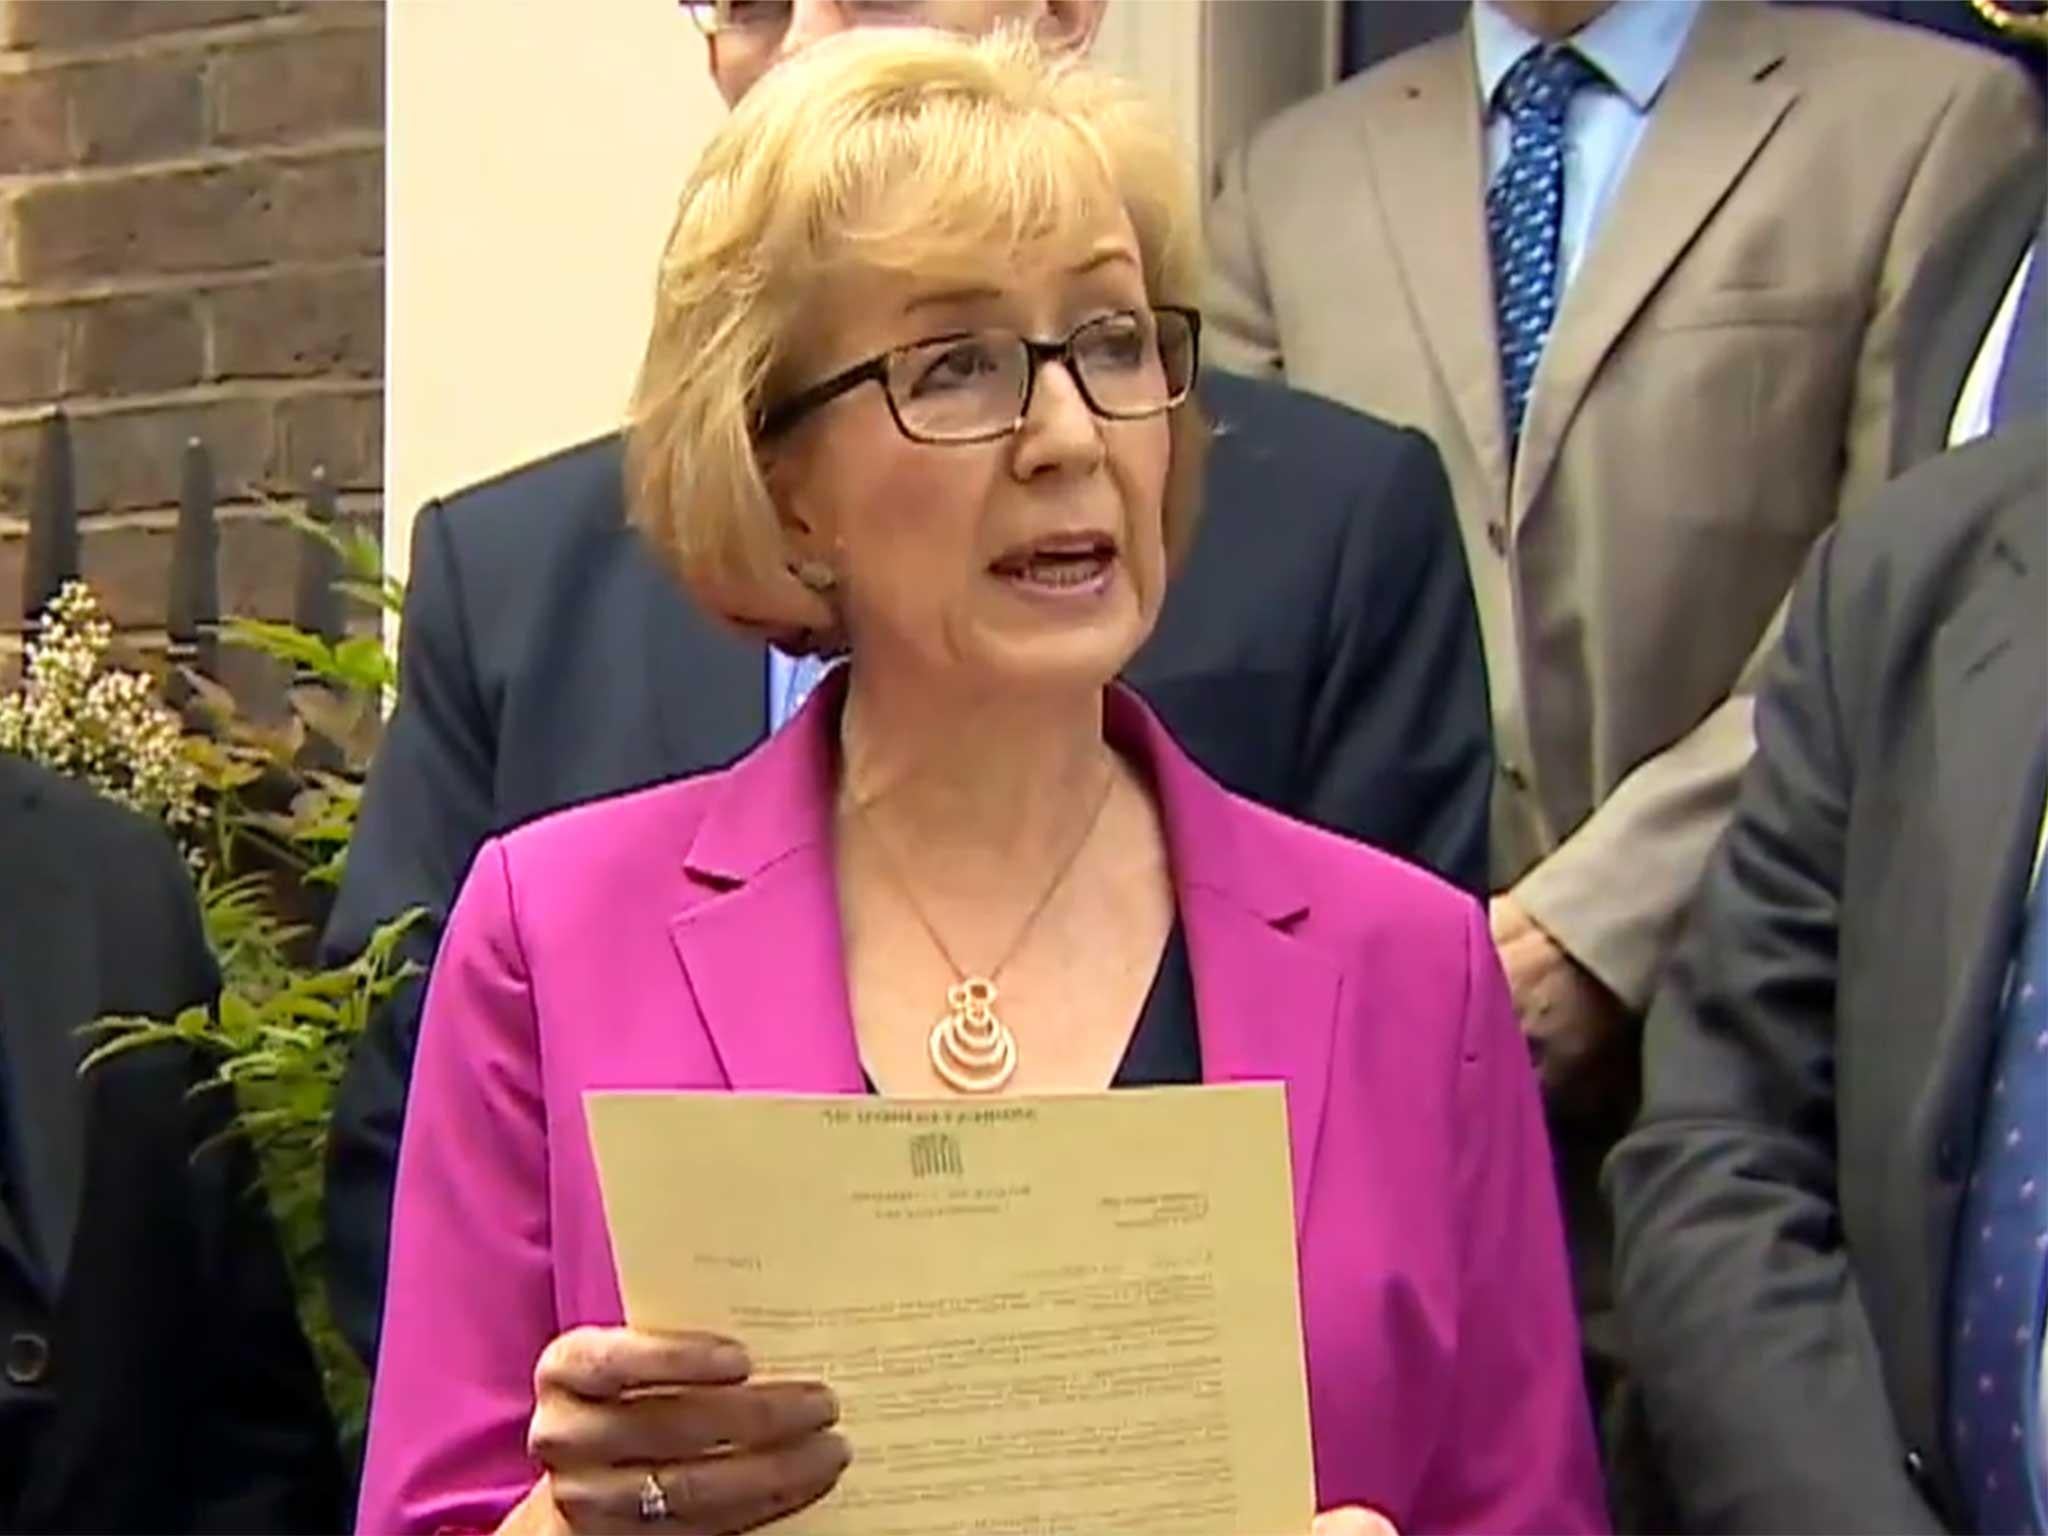 Andrea Leadsom has dropped out of the Conservative leadership race